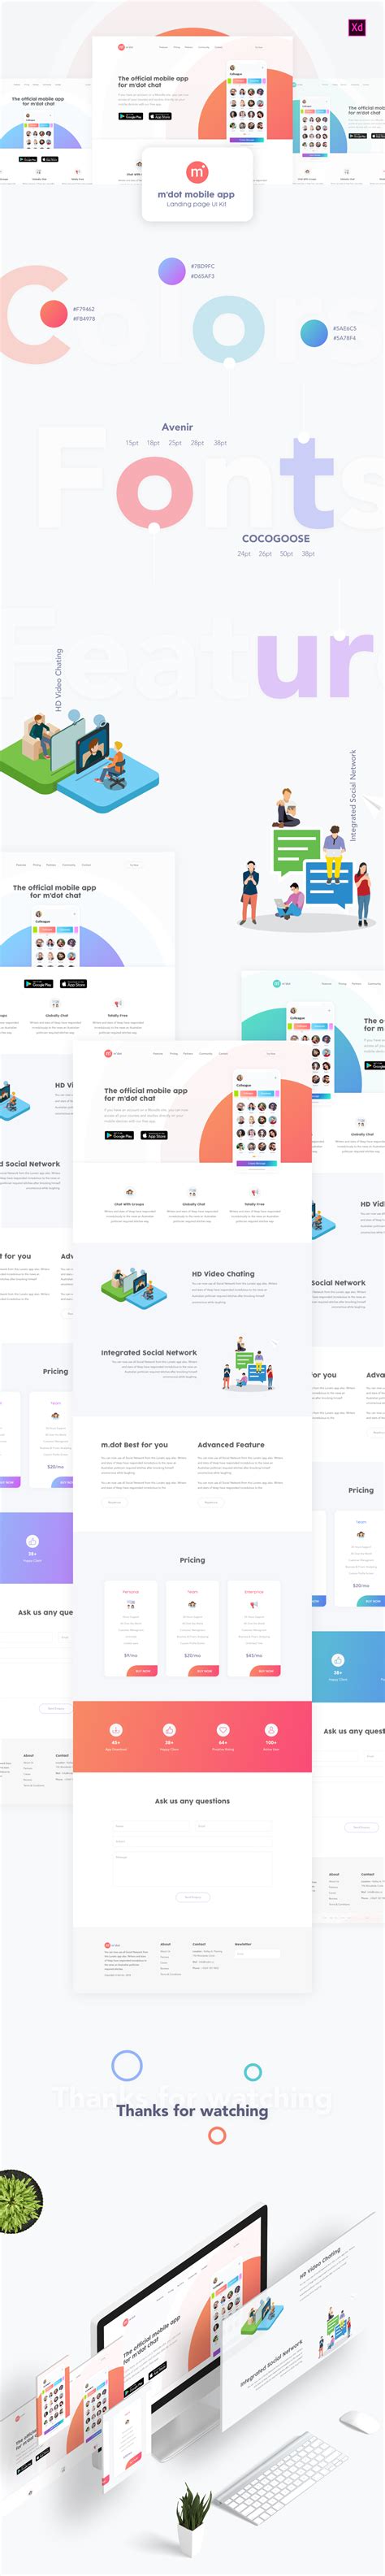 The bread and butter for any mobile app today. m'dot mobile app landing page UI Kit on Behance